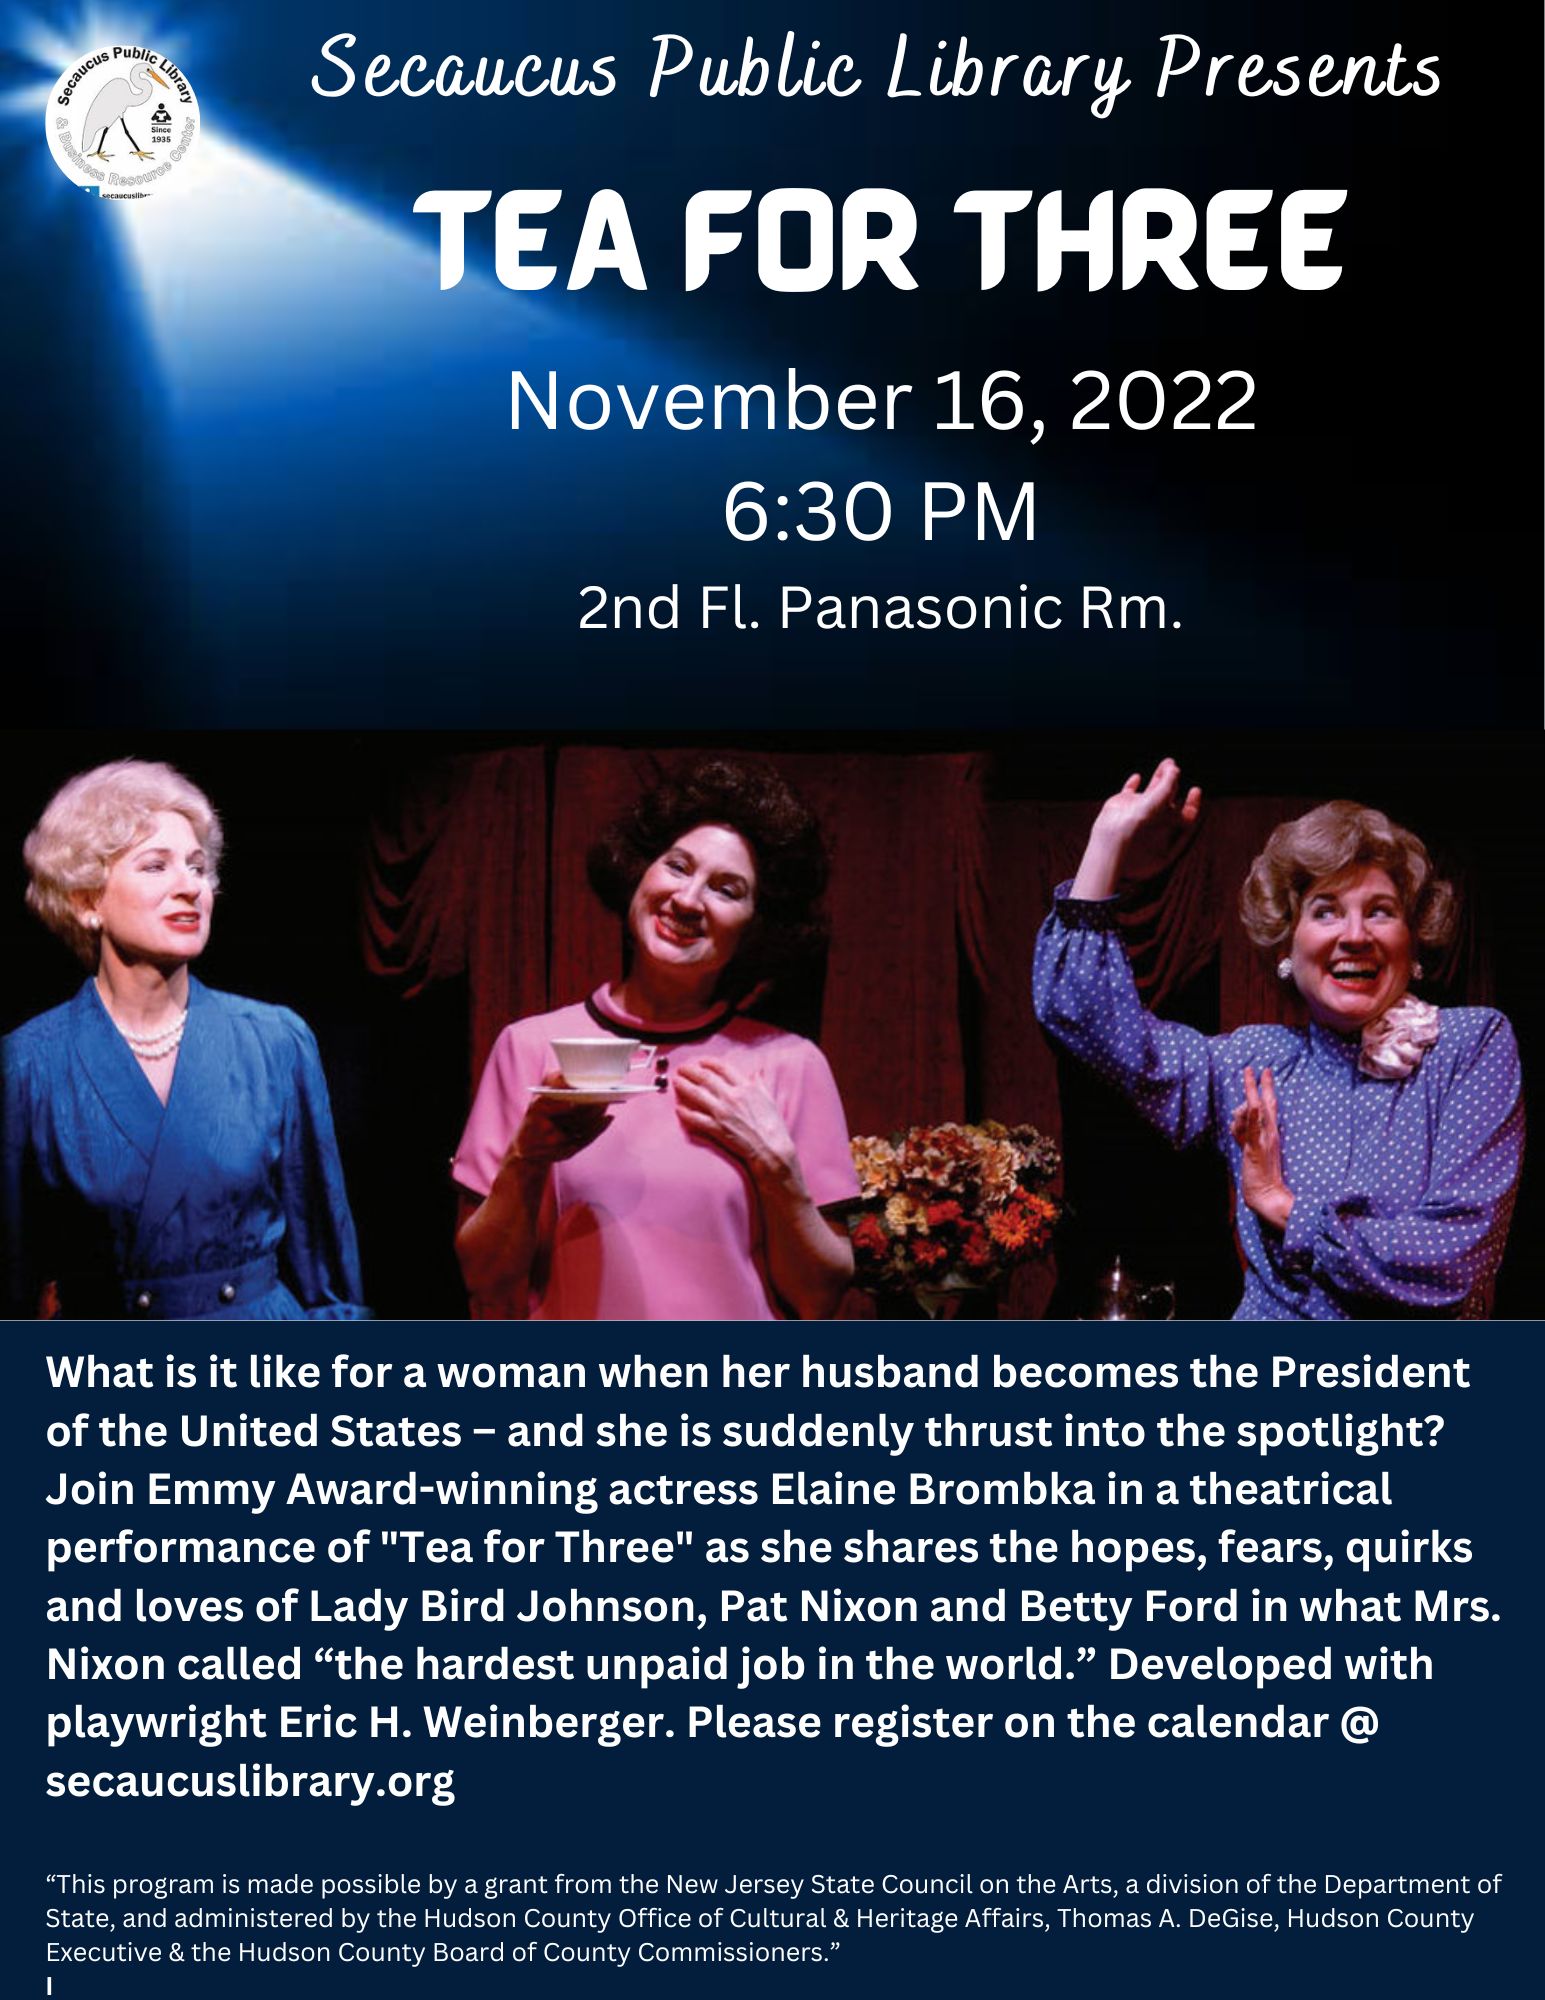 Secaucus Public Library presents Tea for Three flyer; November 16, 2022 6:30 PM 2nd Fl. Panasonic Rm.; What is it like for a woman when her husband becomes the President of the United States – and she is suddenly thrust into the spotlight? Join Emmy Award-winning actress Elaine Brombka in a theatrical performance of "Tea for Three" as she shares the hopes, fears, quirks and loves of Lady Bird Johnson, Pat Nixon and Betty Ford in what Mrs. Nixon called “the hardest unpaid job in the world.” Developed with playwright Eric H. Weinberger. Please register on the calendar @ secaucuslibrary.org